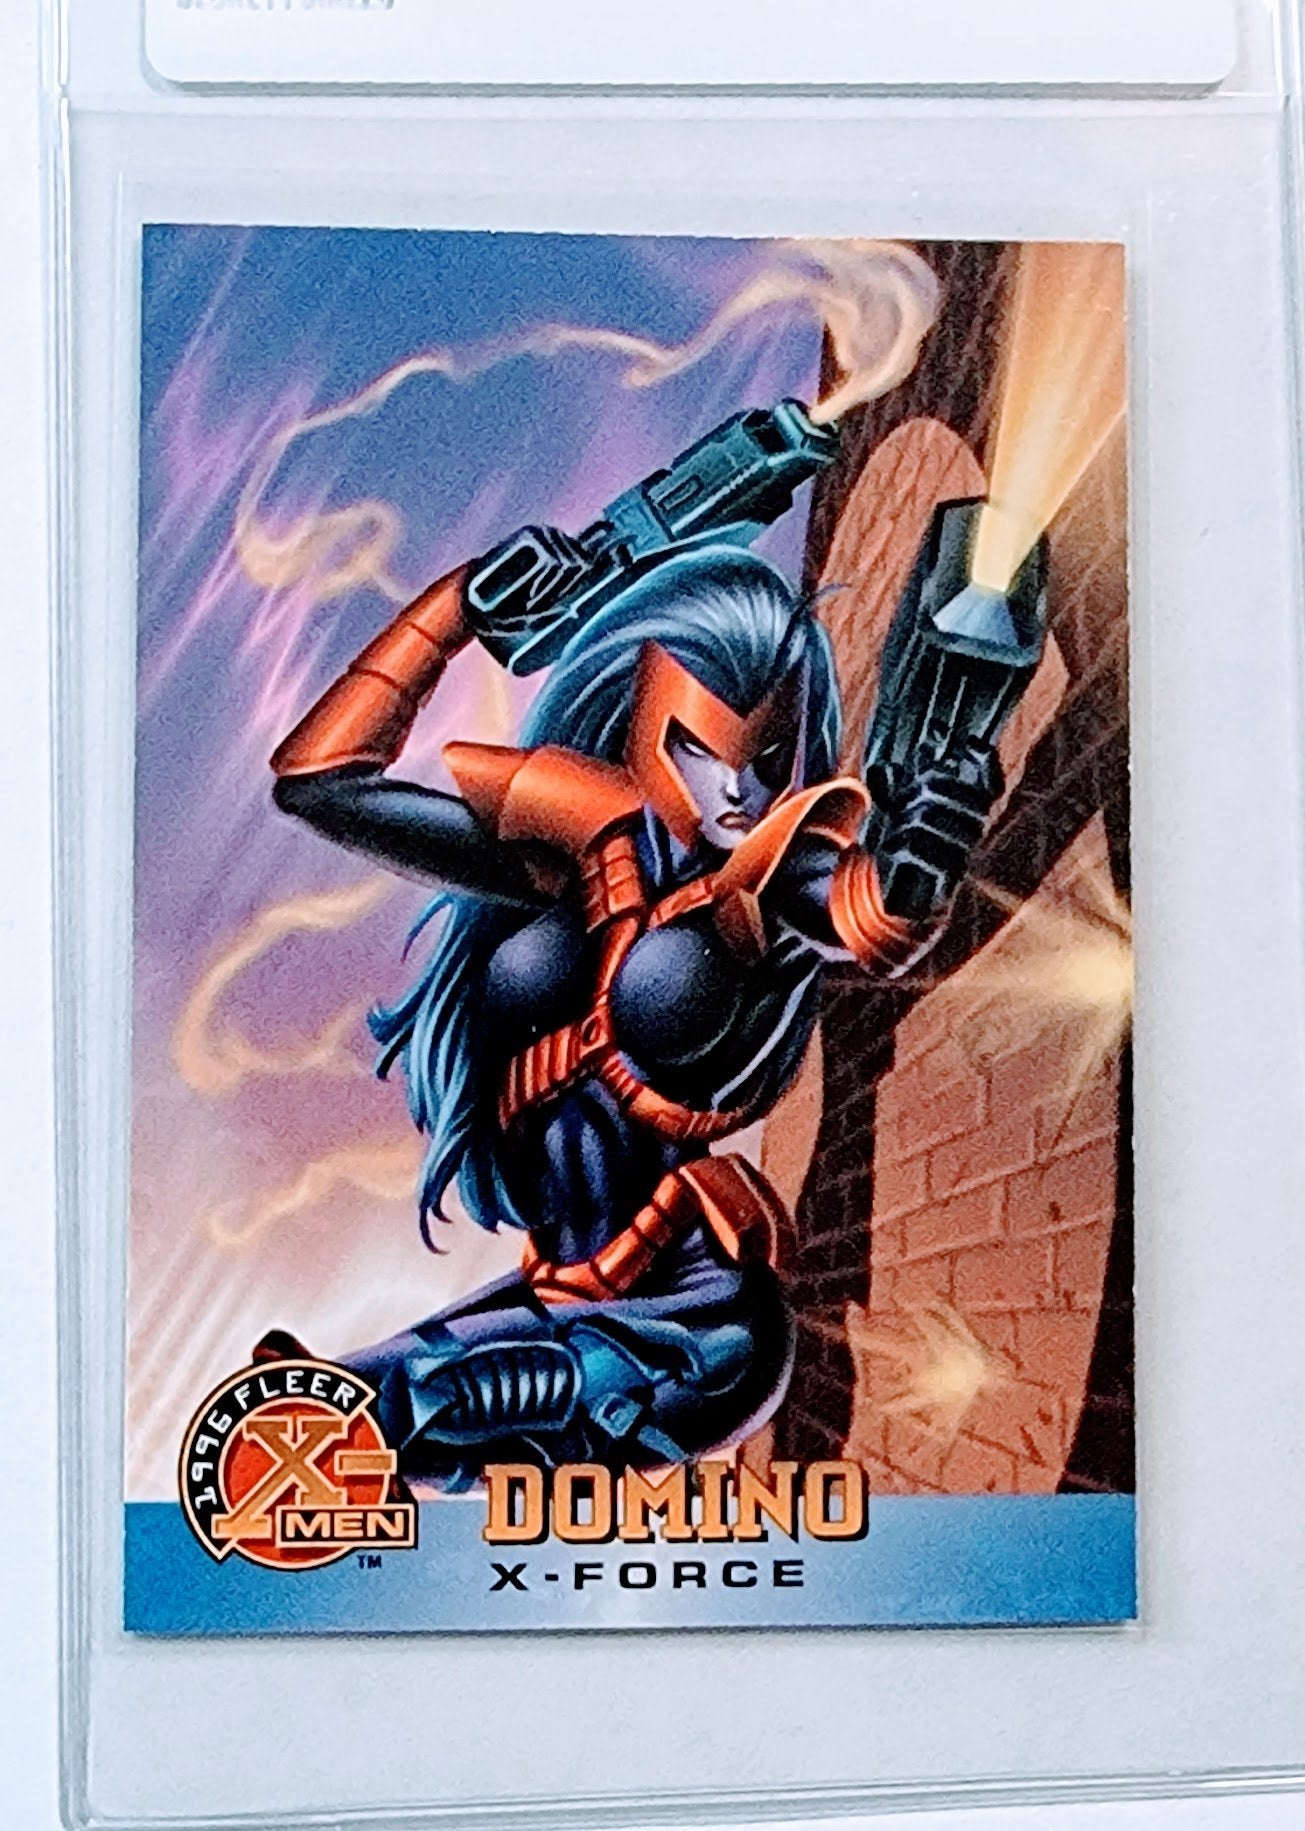 1996 Fleer X-Men Domino Marvel Trading Card VG/NM cAVM1 simple Xclusive Collectibles   